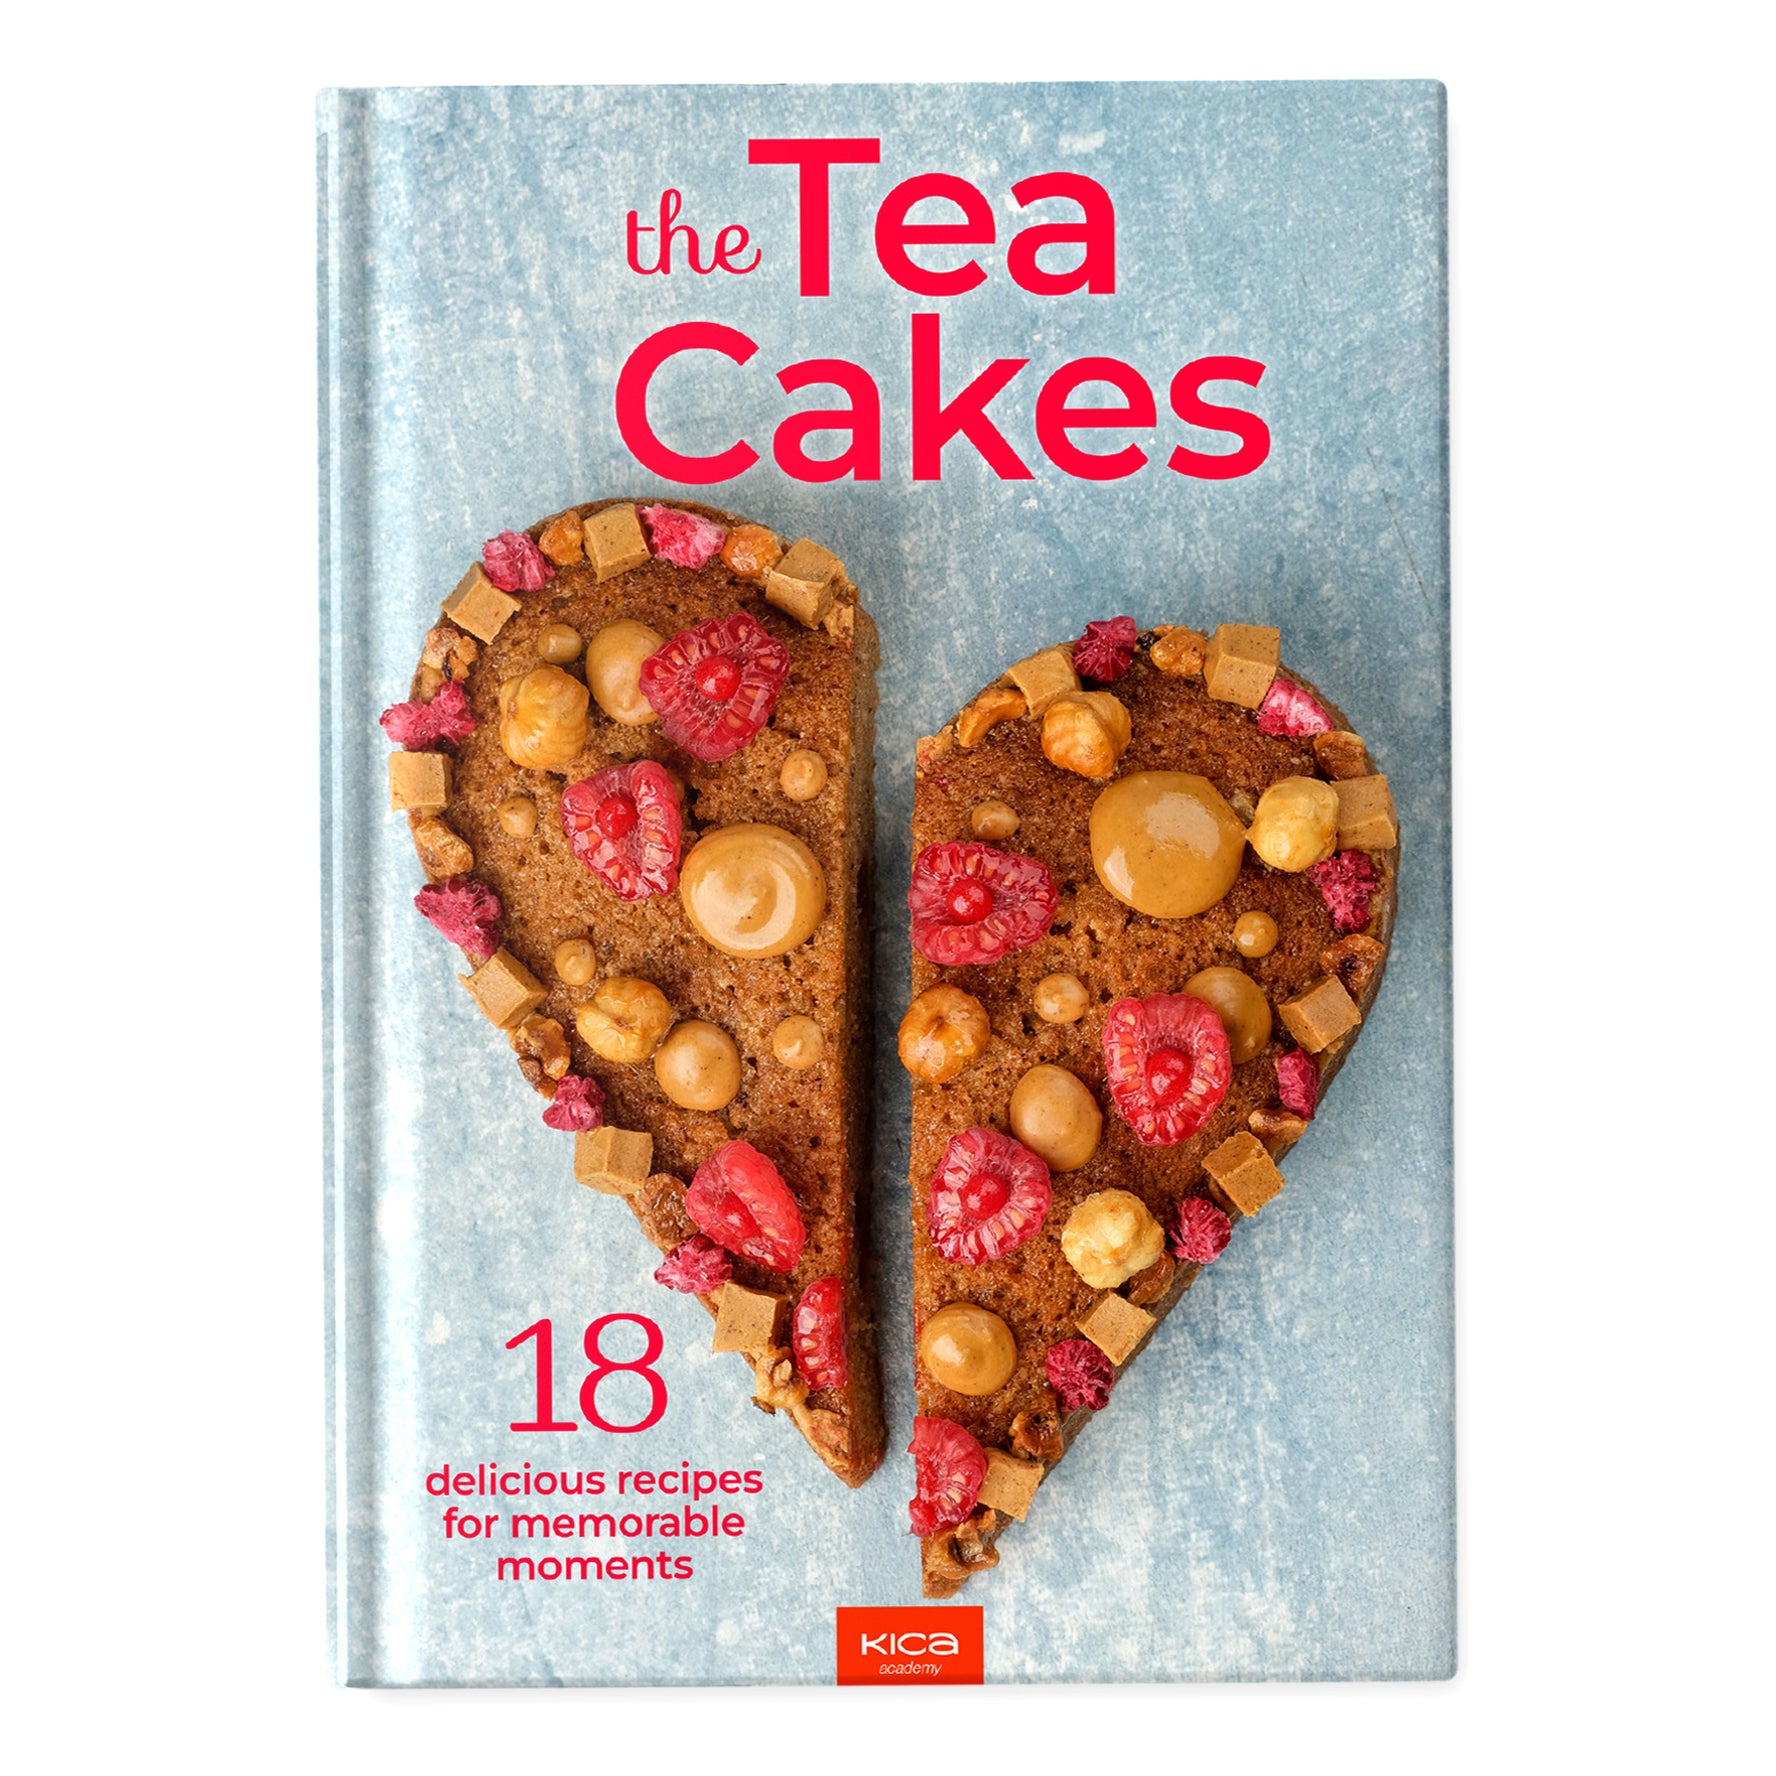 The Tea Cakes: 18 delicious recipes for memorable moments